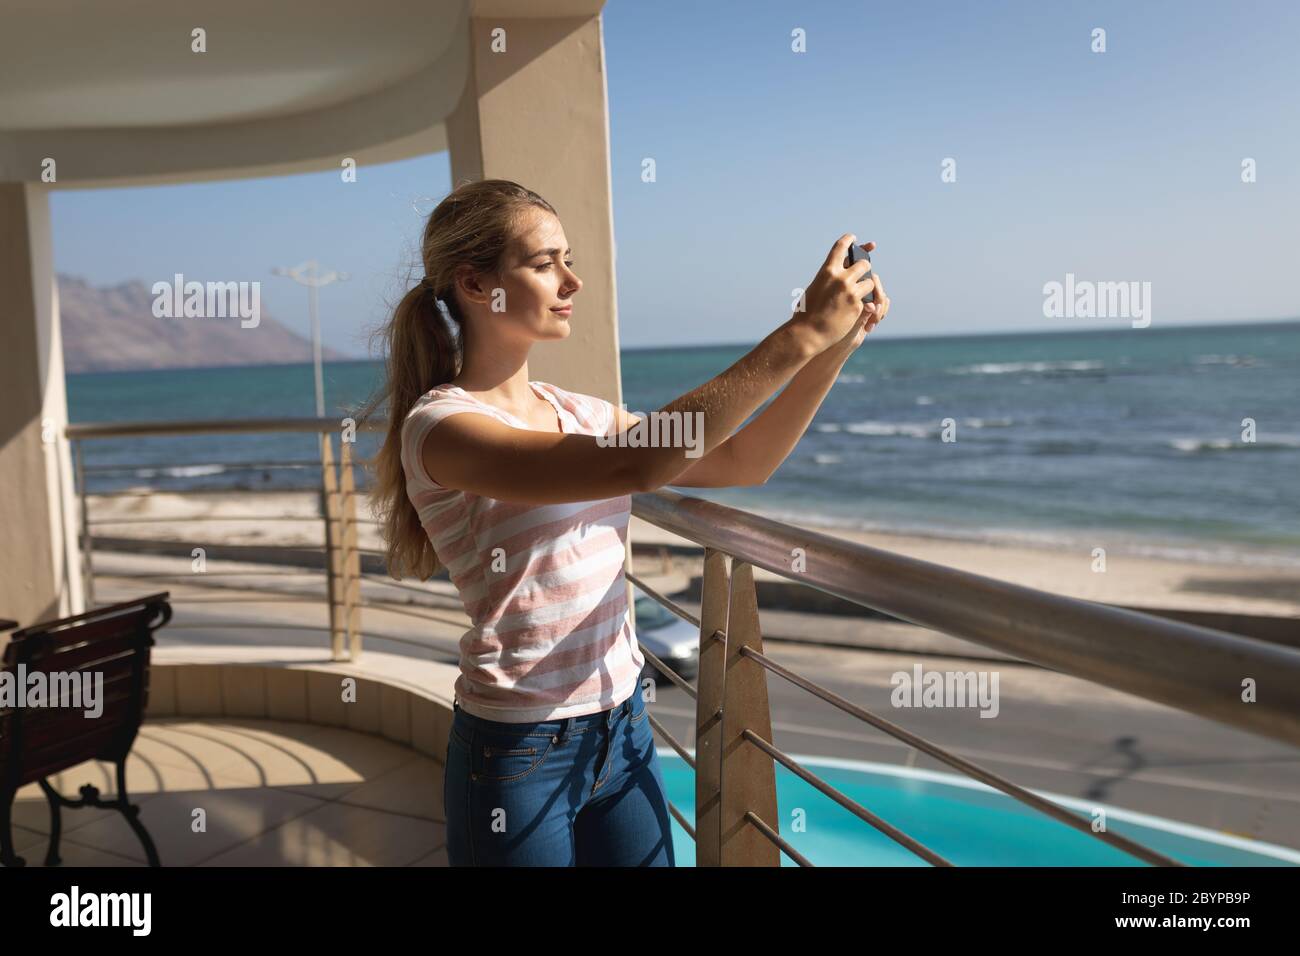 Caucasian woman standing on a balcony holding a smartphone and taking a selfie Stock Photo